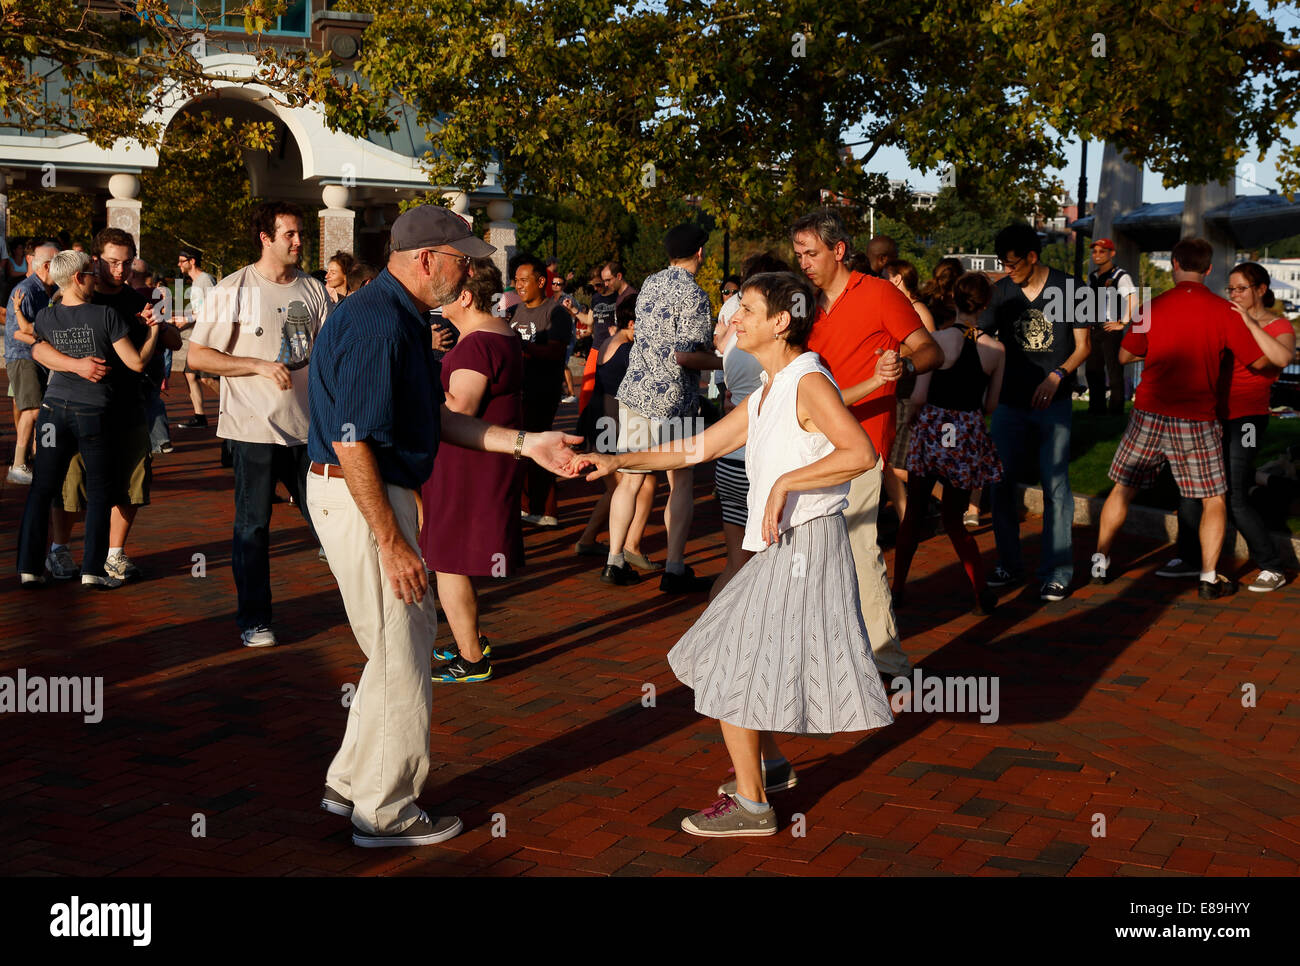 A group of people swing dancing in Piers Park, Boston, Massachusetts, USA Stock Photo